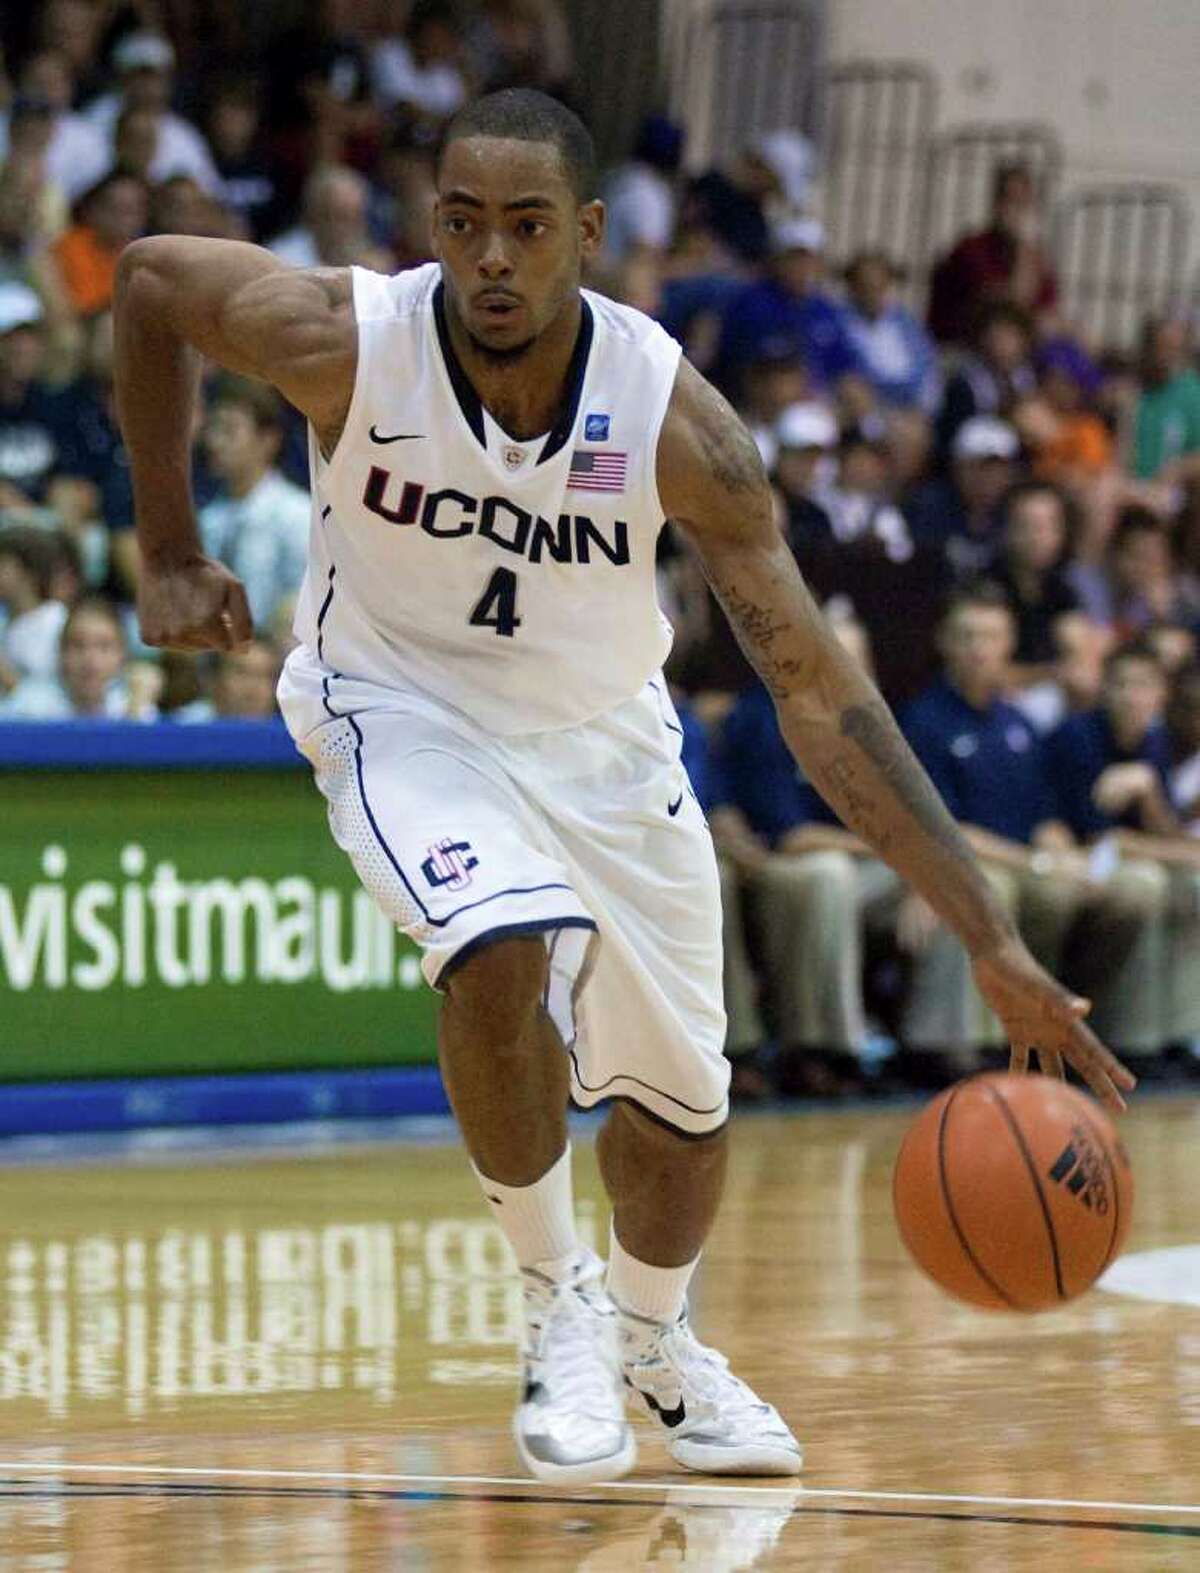 FILE - In this Nov. 22, 2010 file photo, Connecticut forward Jamal Coombs-McDaniel (4) looks for an opening in the Wichita State defense during an NCAA college basketball game at the Maui Invitational in Lahaina, Hawaii. UConn campus police say the sophomore was arrested Thursday night, April 21, 2011, with two other people. He was charged with possession of more than four ounces of marijuana and possession of drug paraphernalia. Police say the three had 5.6 ounces of the drug. (AP Photo/Eugene Tanner, File)